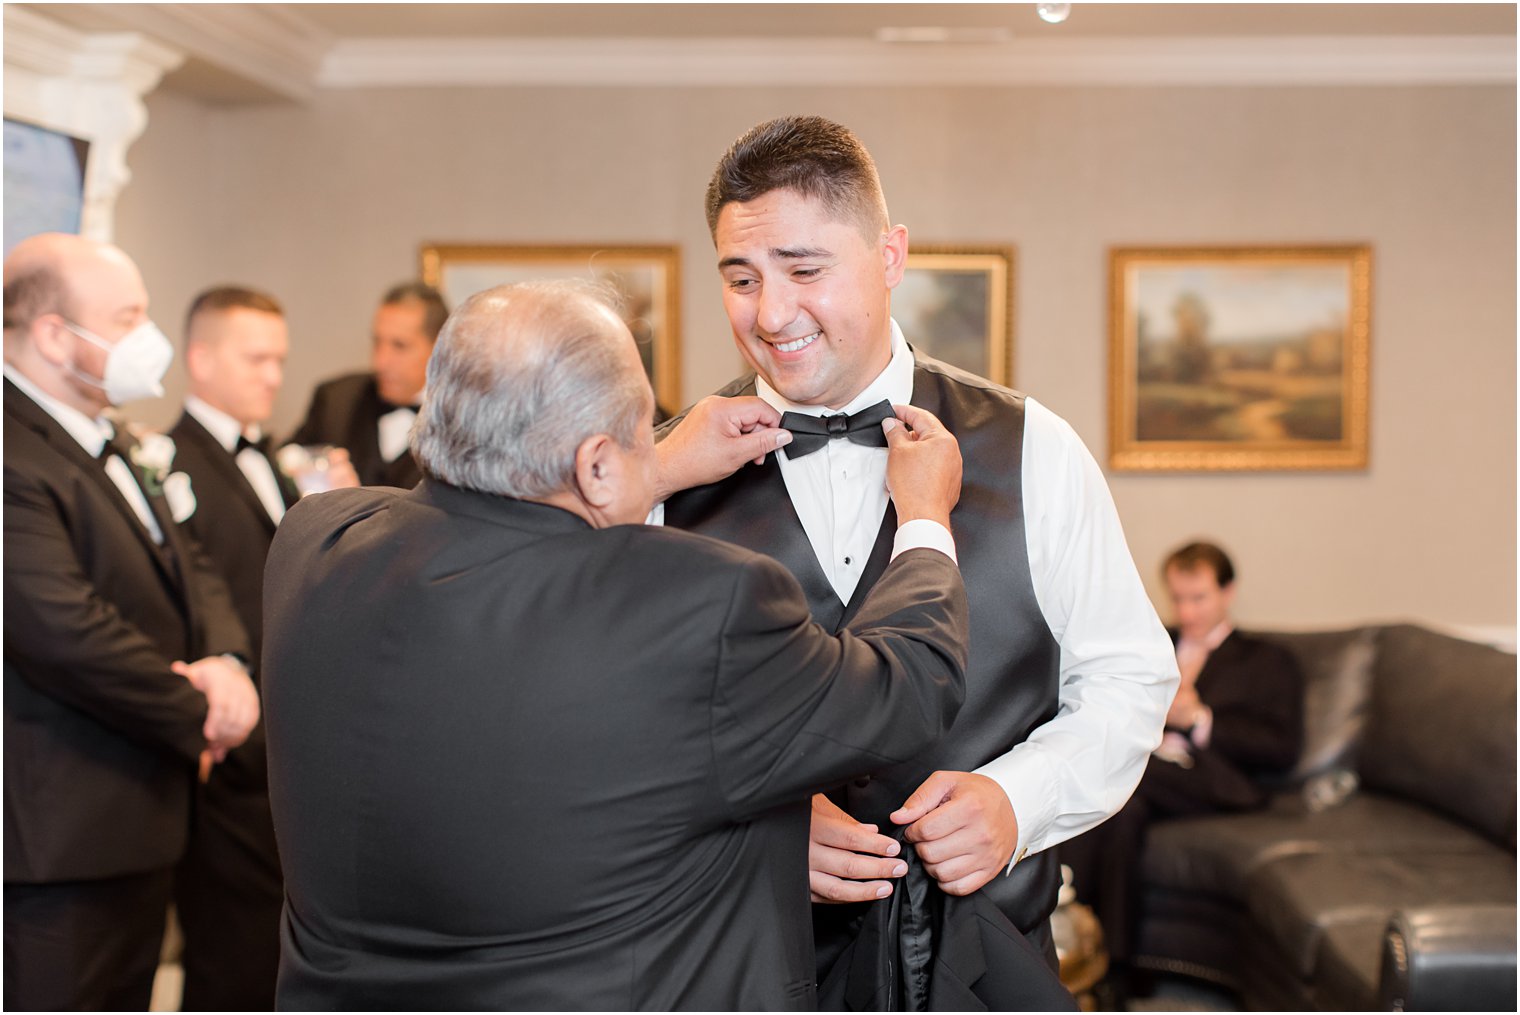 dad serves as son's best man and adjusts tie on wedding day